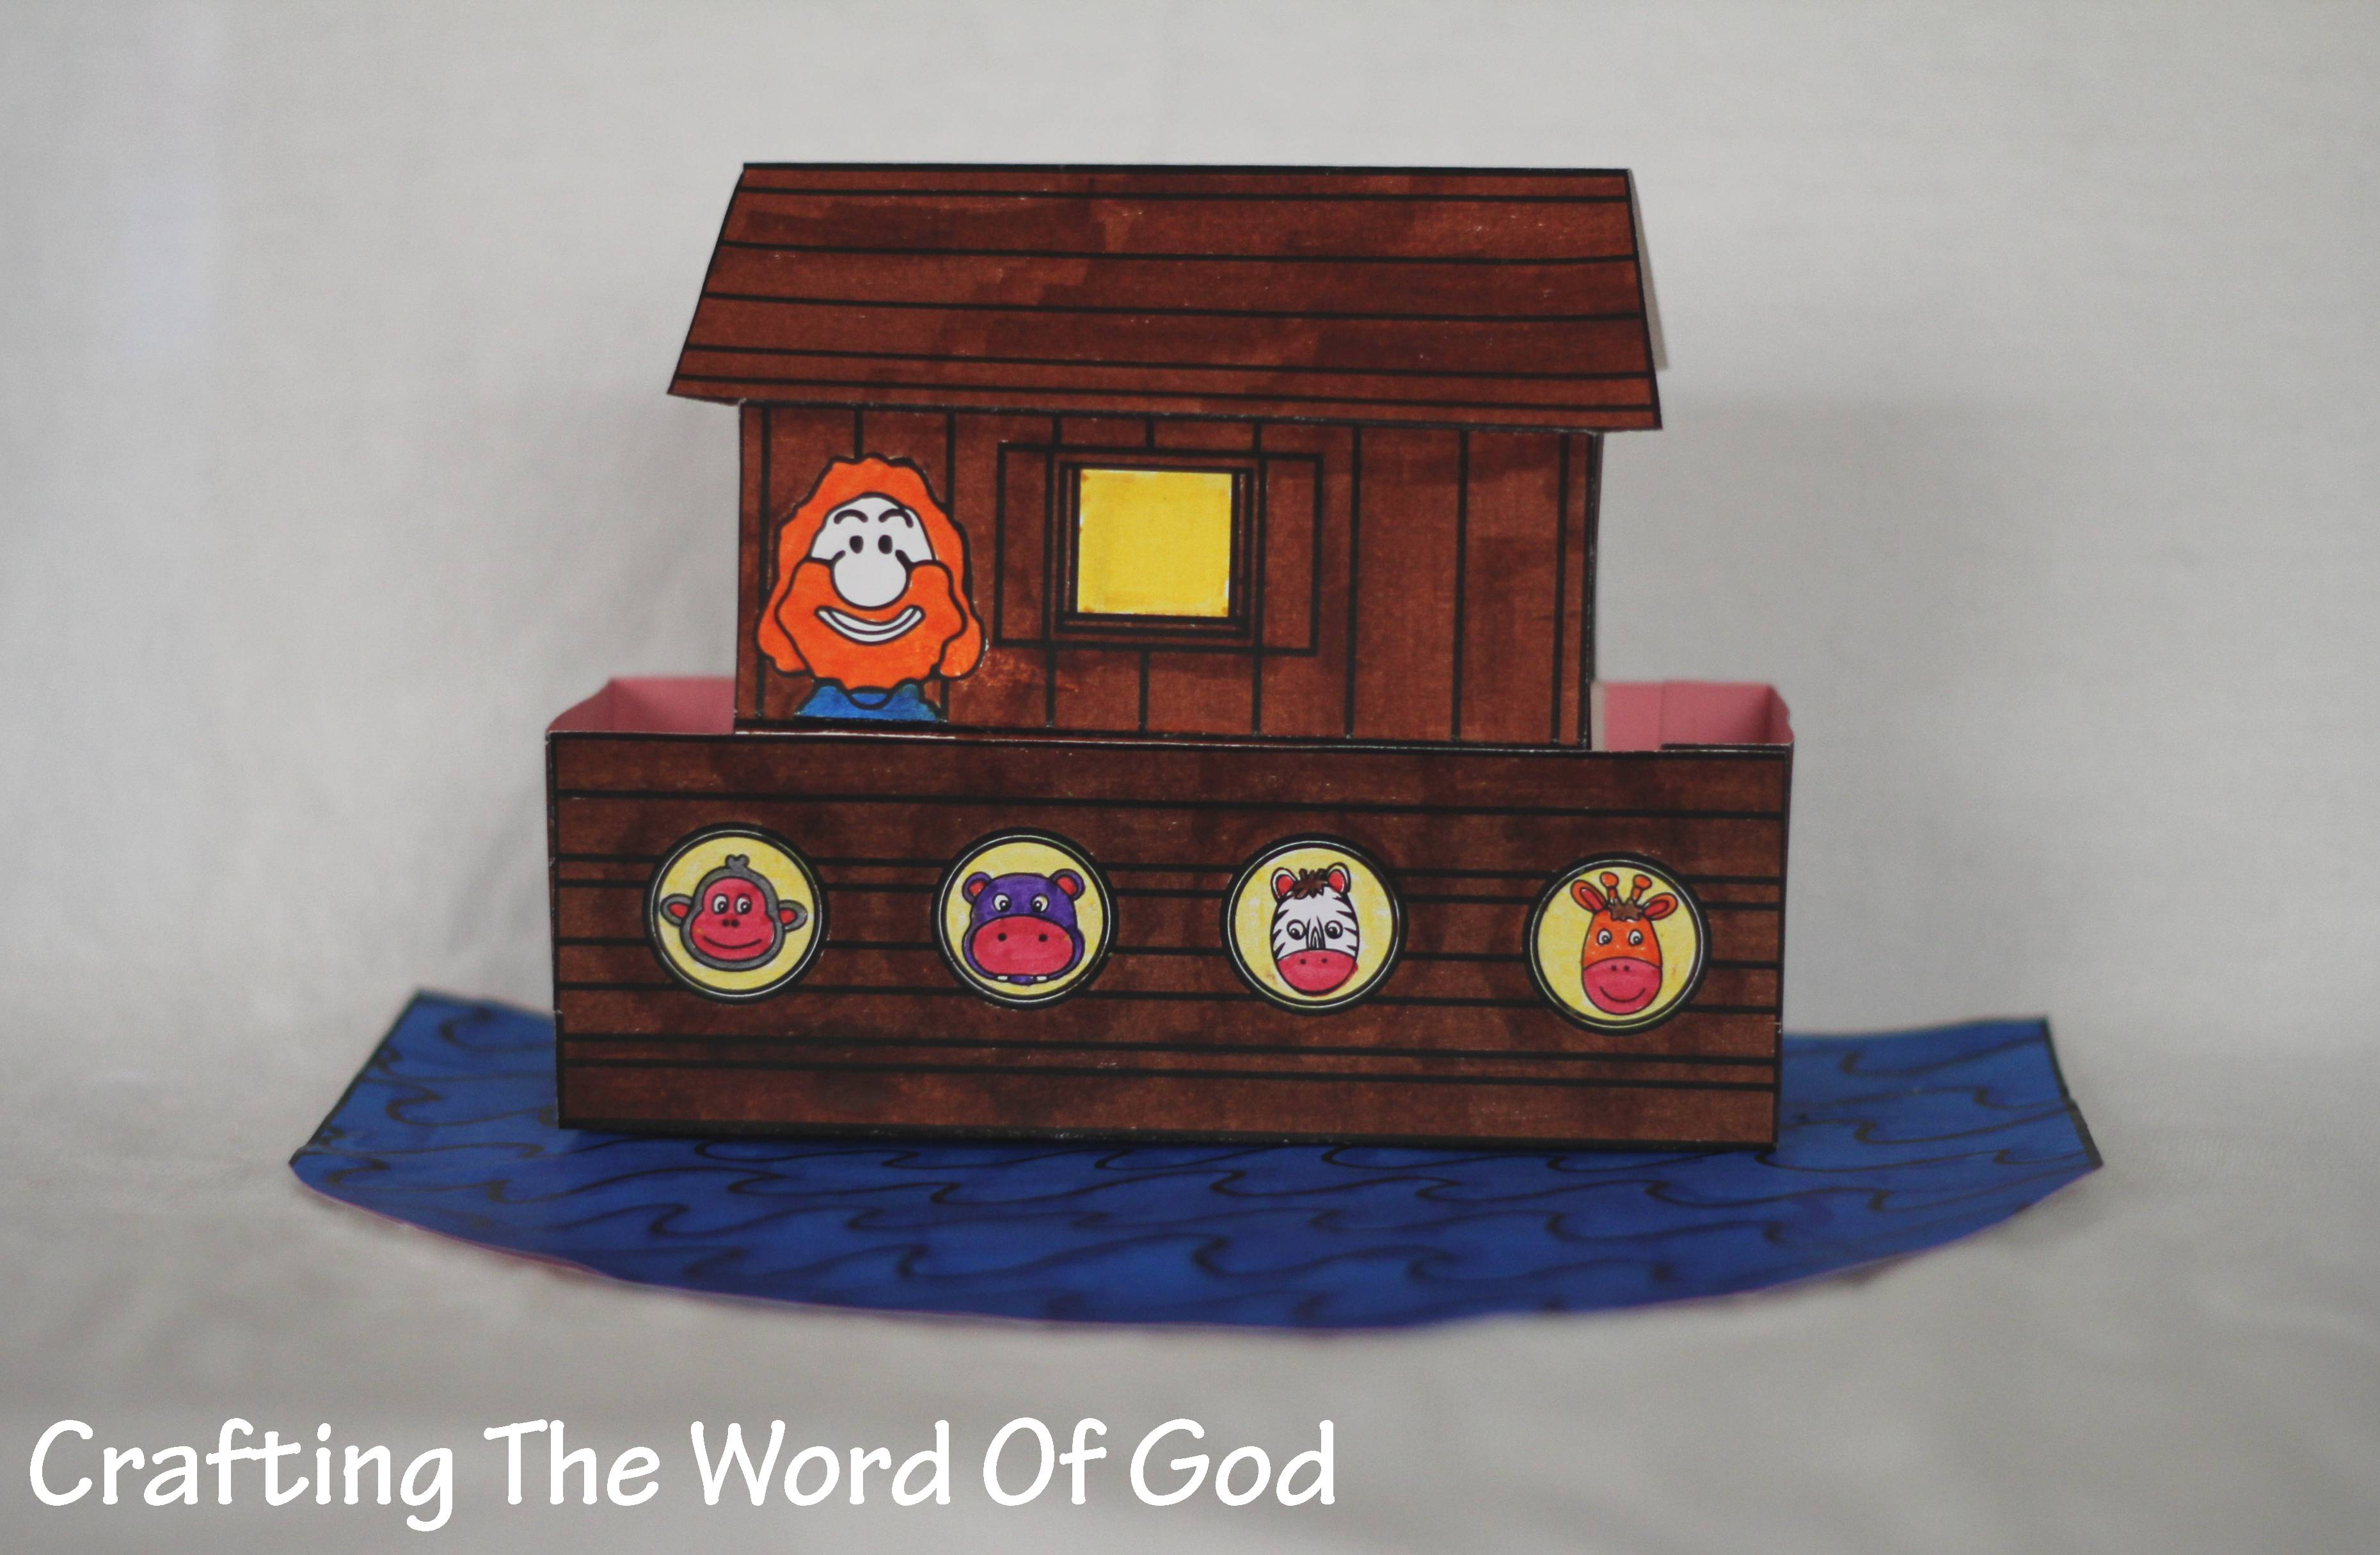  for your kids to act out the story of Noah and the ark for themselves